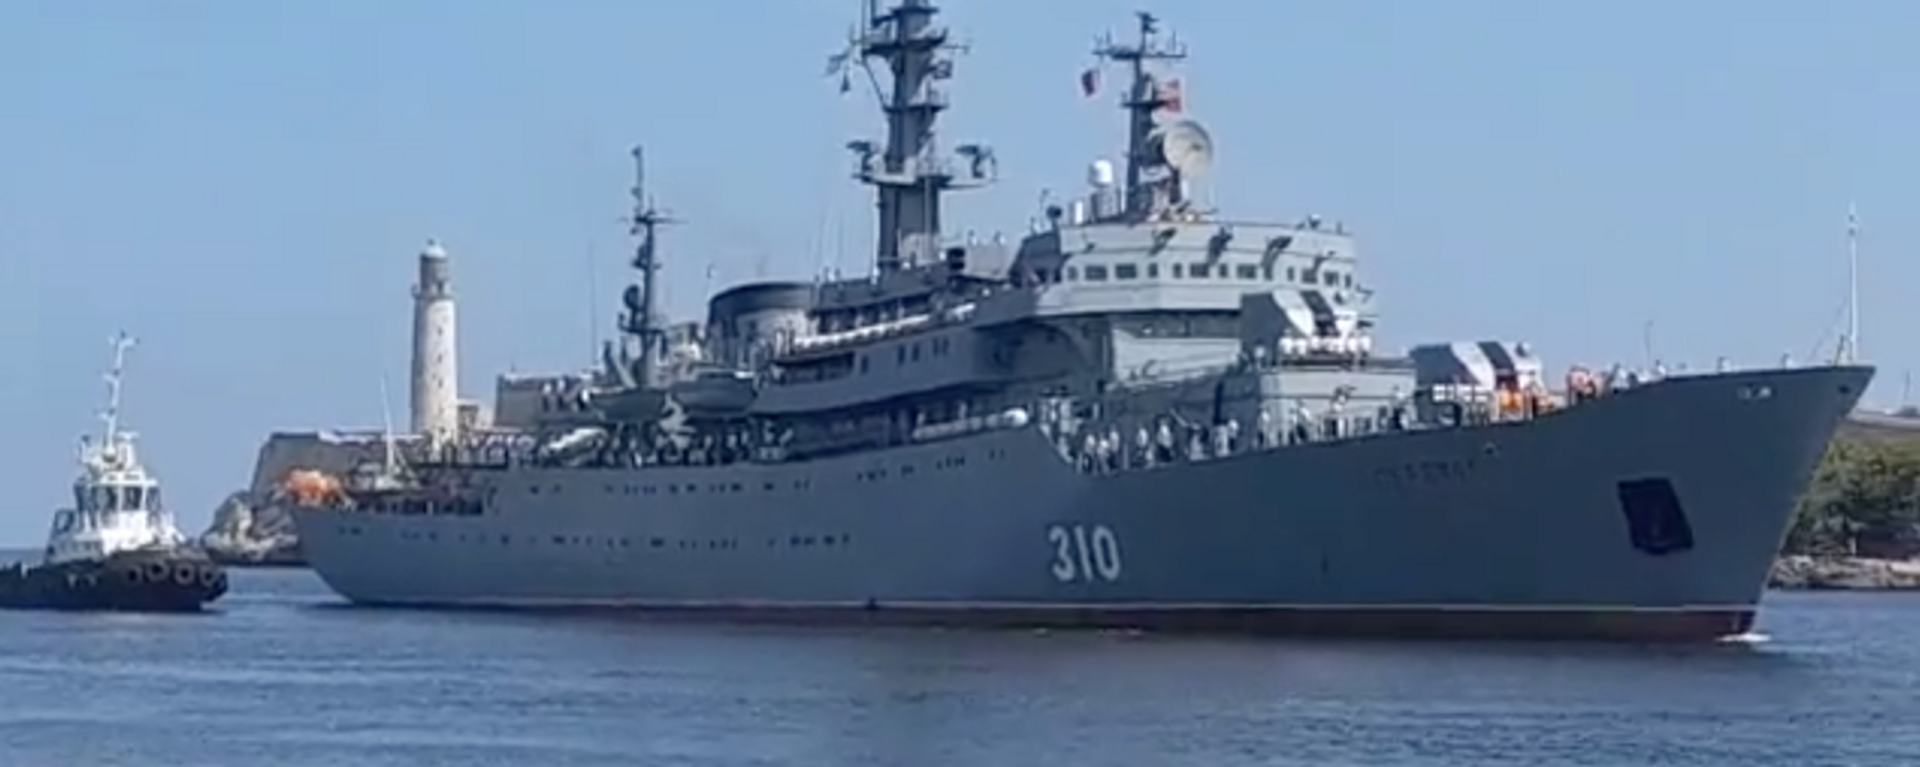 The Russian Navy’s Perekop training ship with cadets on board has arrived in Havana Bay - Sputnik Africa, 1920, 12.07.2023